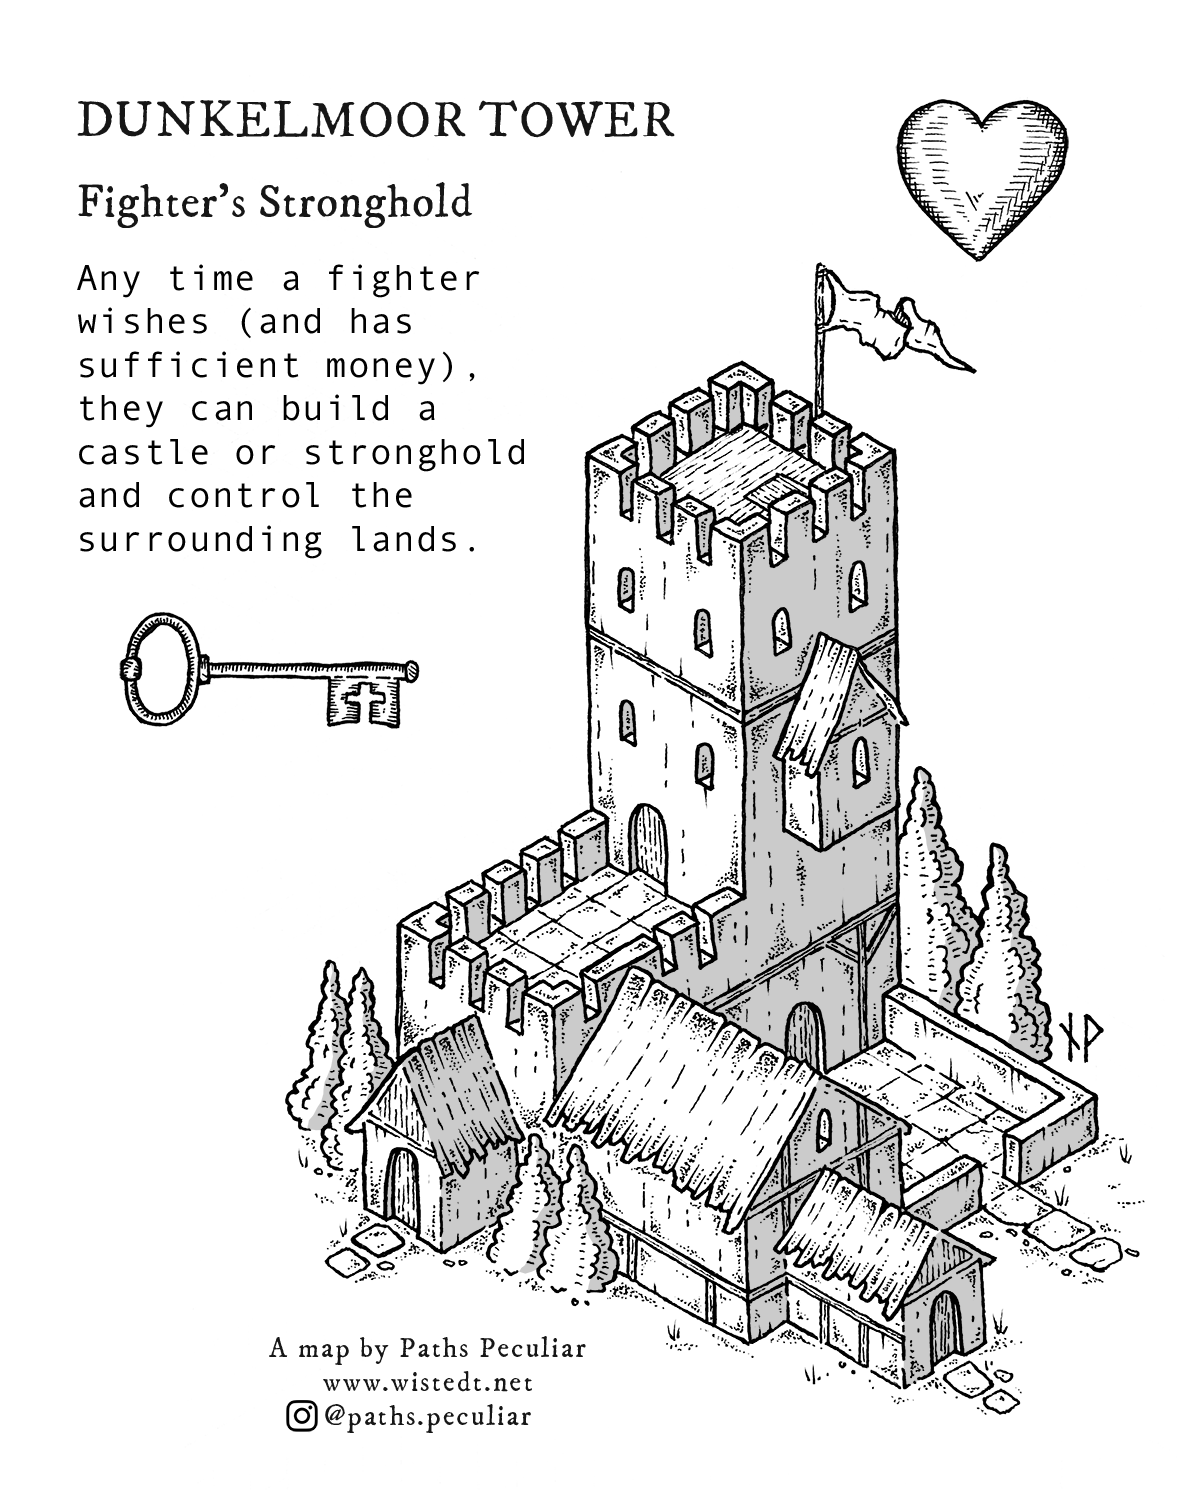 Isometric view of a fighter's stronghold